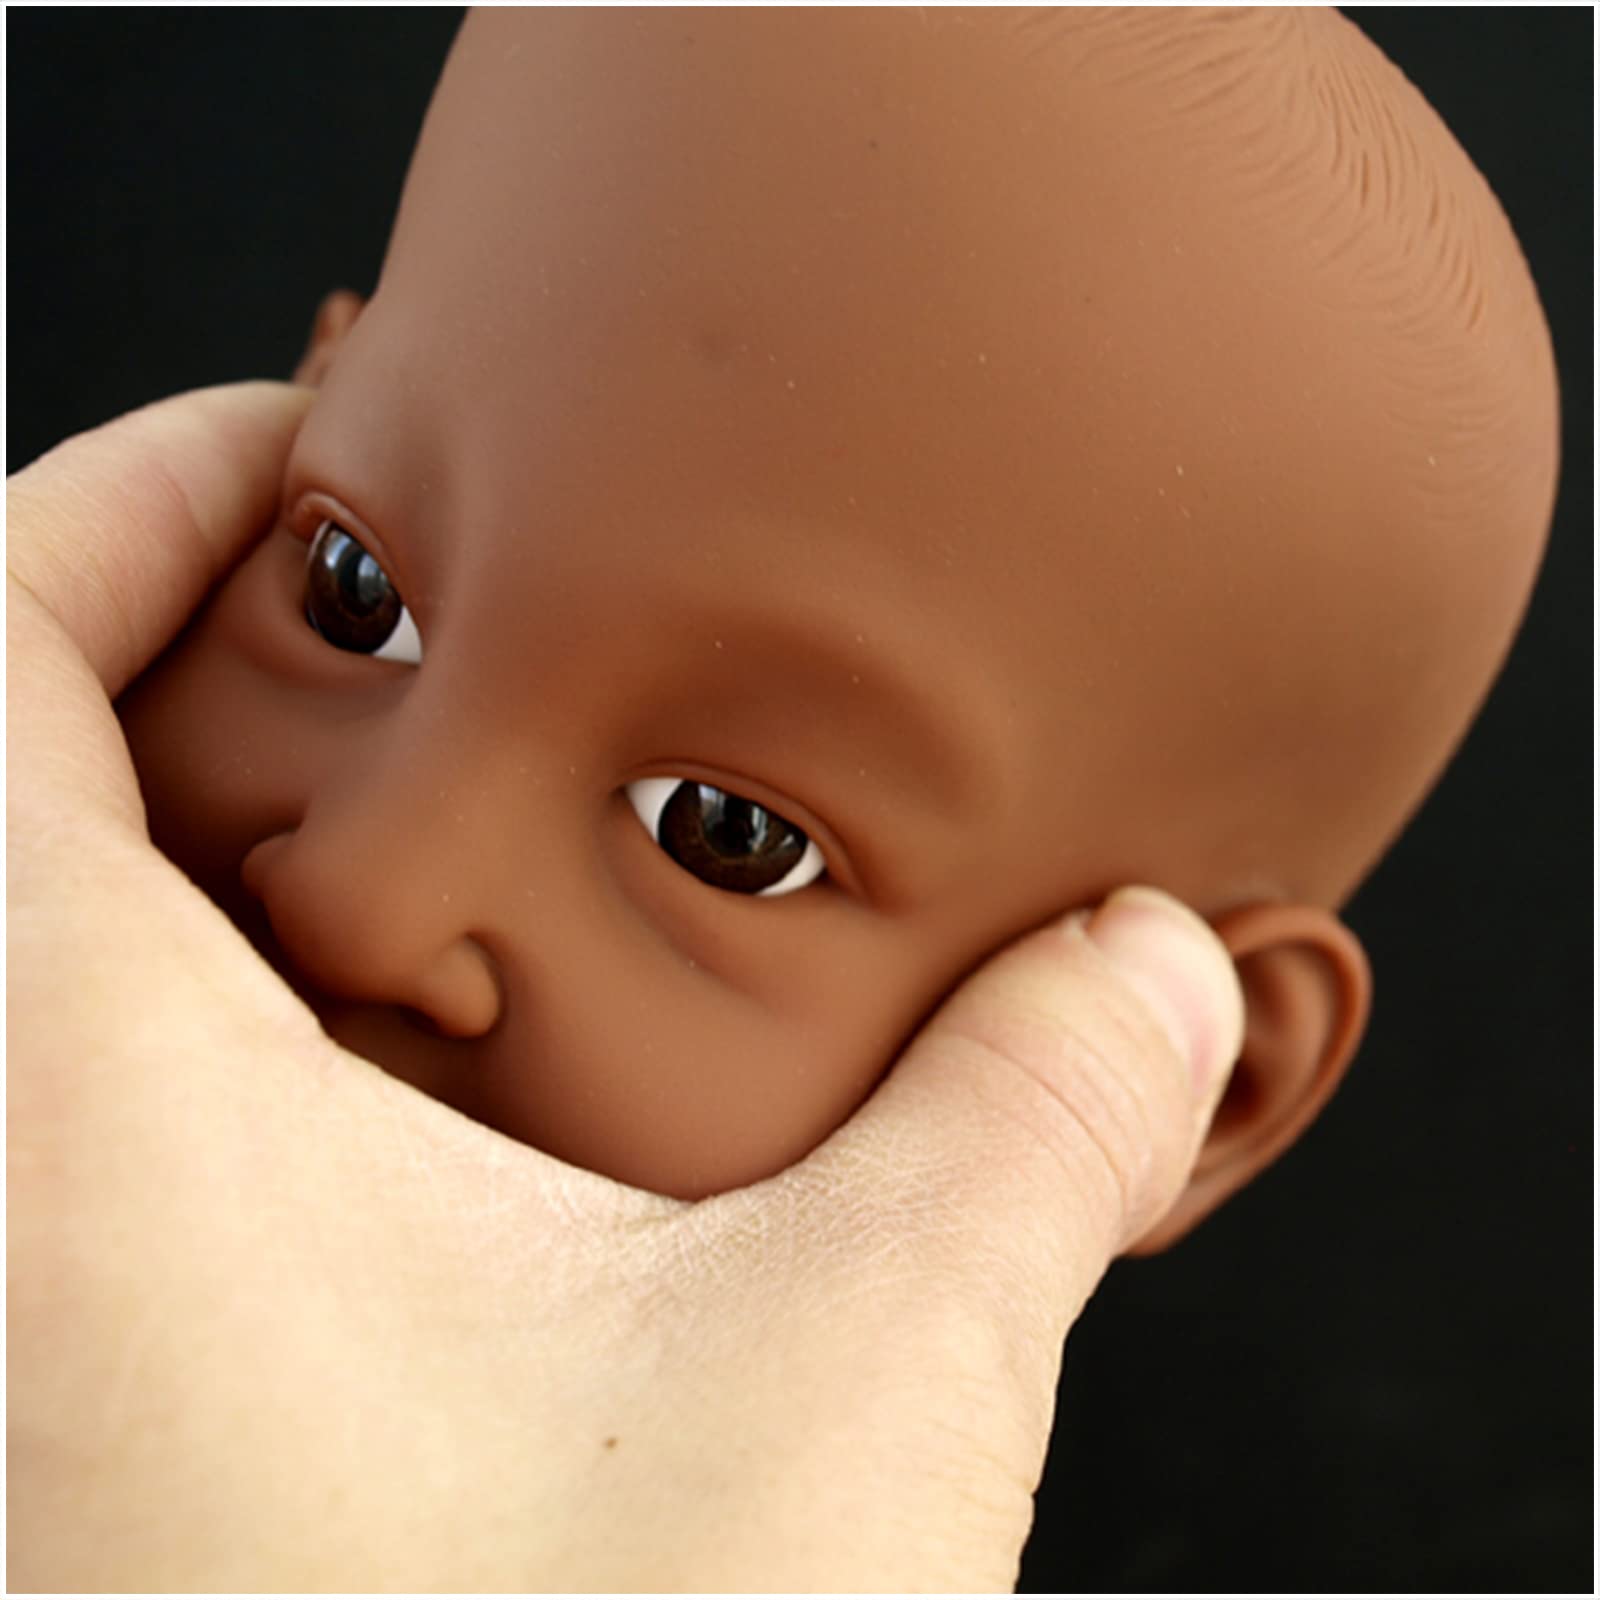 KH66ZKY Lifelike Reborn Baby Dolls 16.1 Inches Silicone Vinyl Infant Care Model for Teaching Gynecology Educational Medical Science Model,Girl